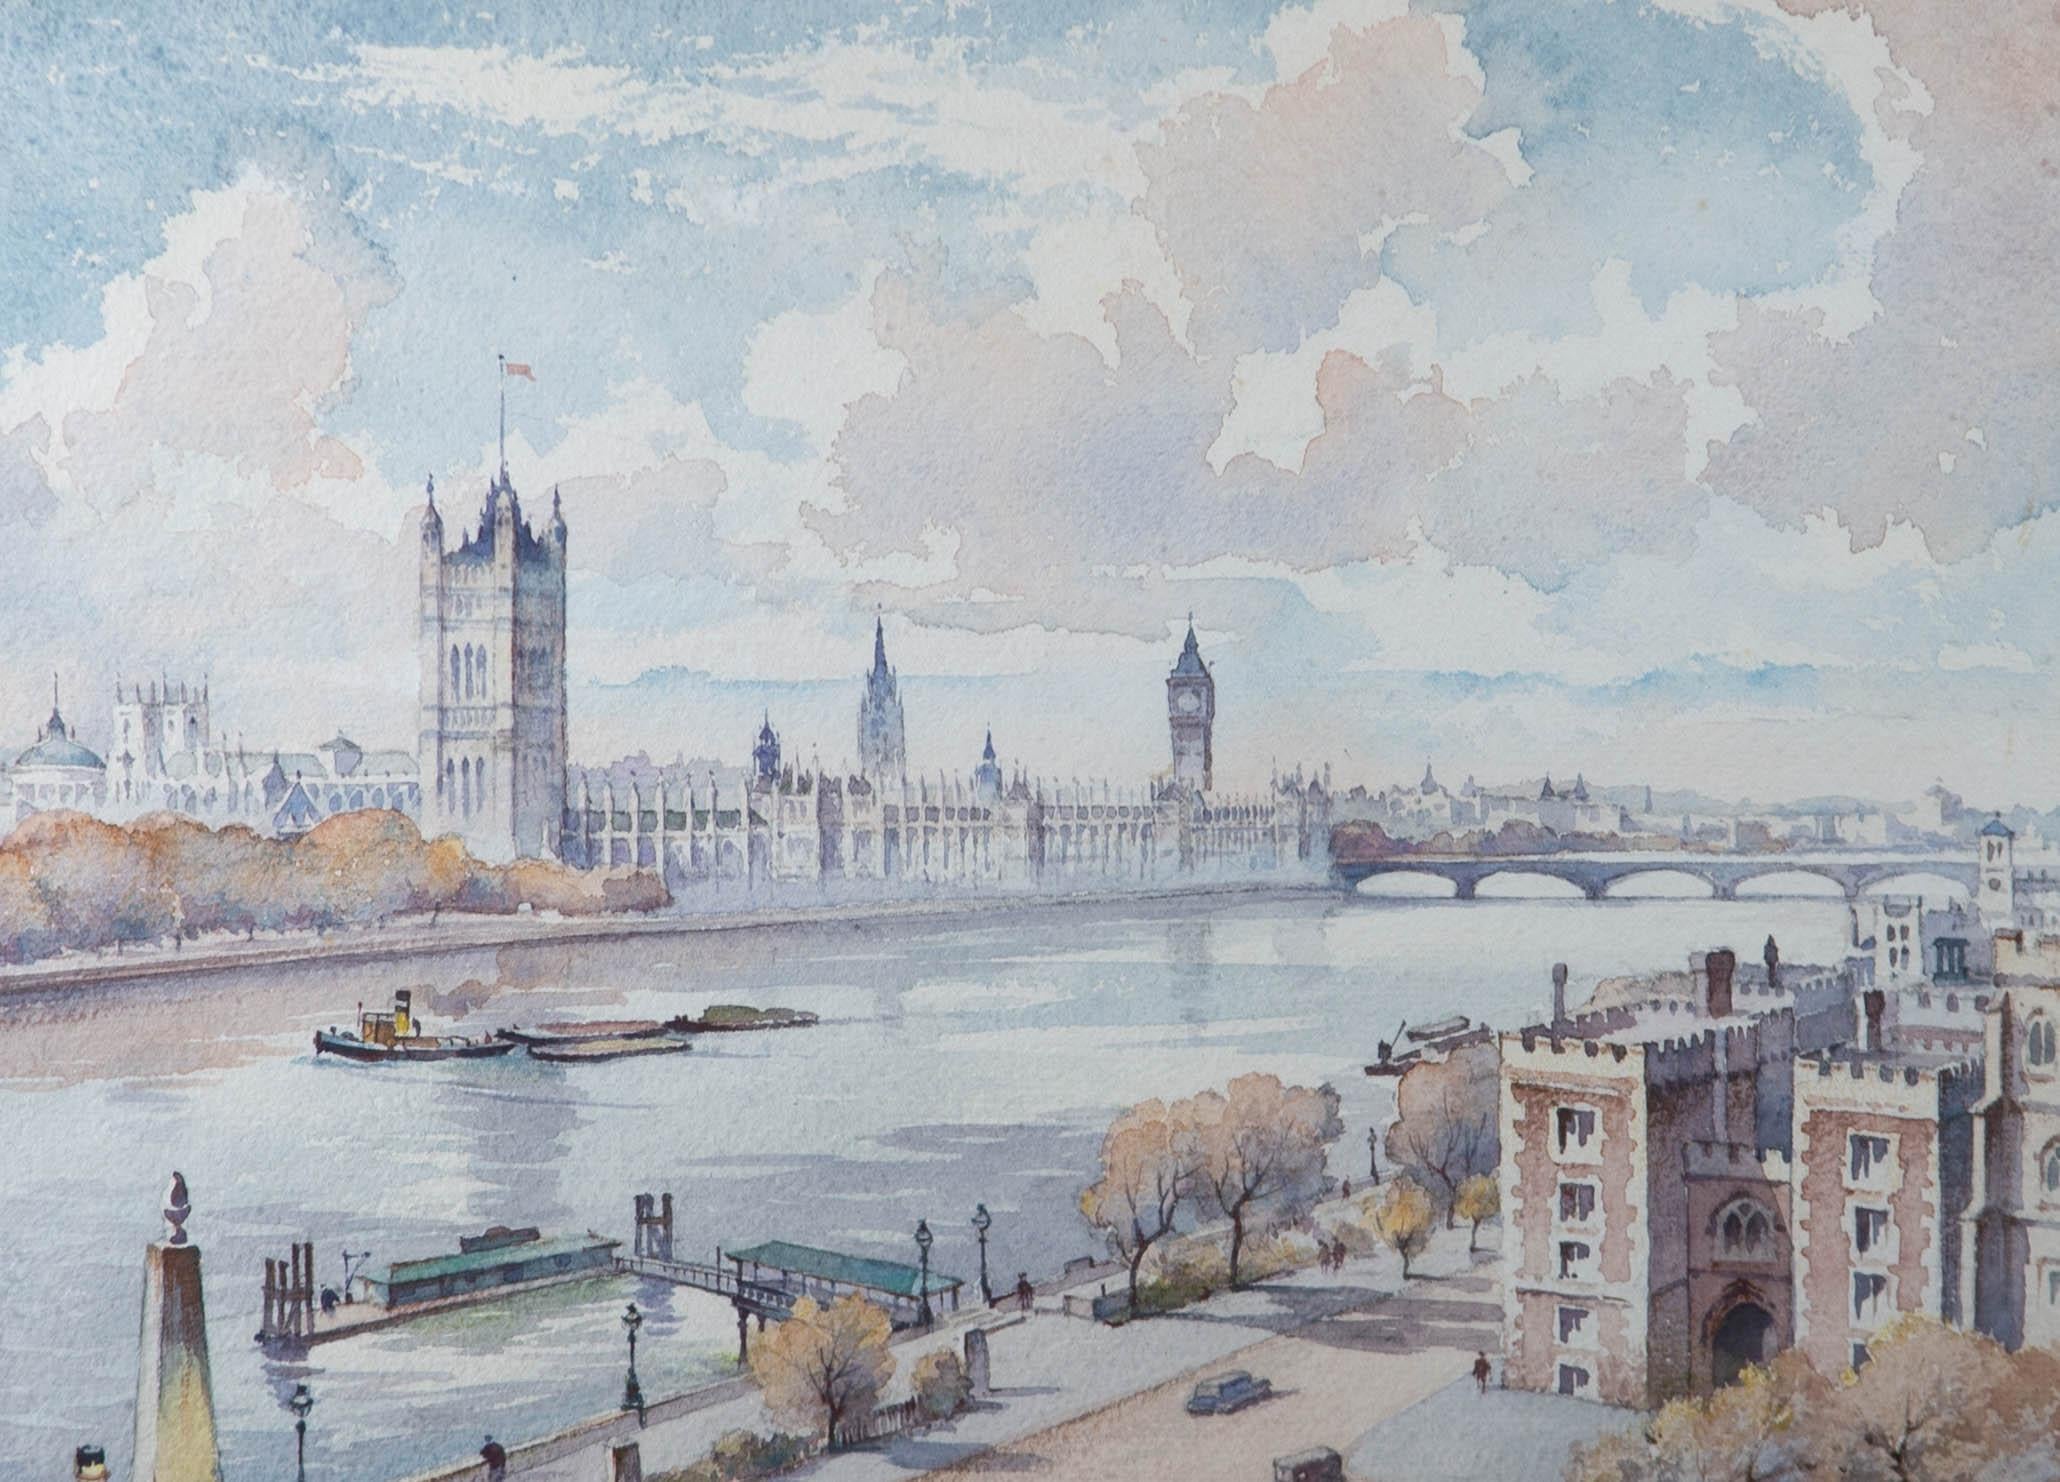 Emerson Harold Groom A.R.E. - Mid 20th Century Watercolour, Houses Of Parliament 1